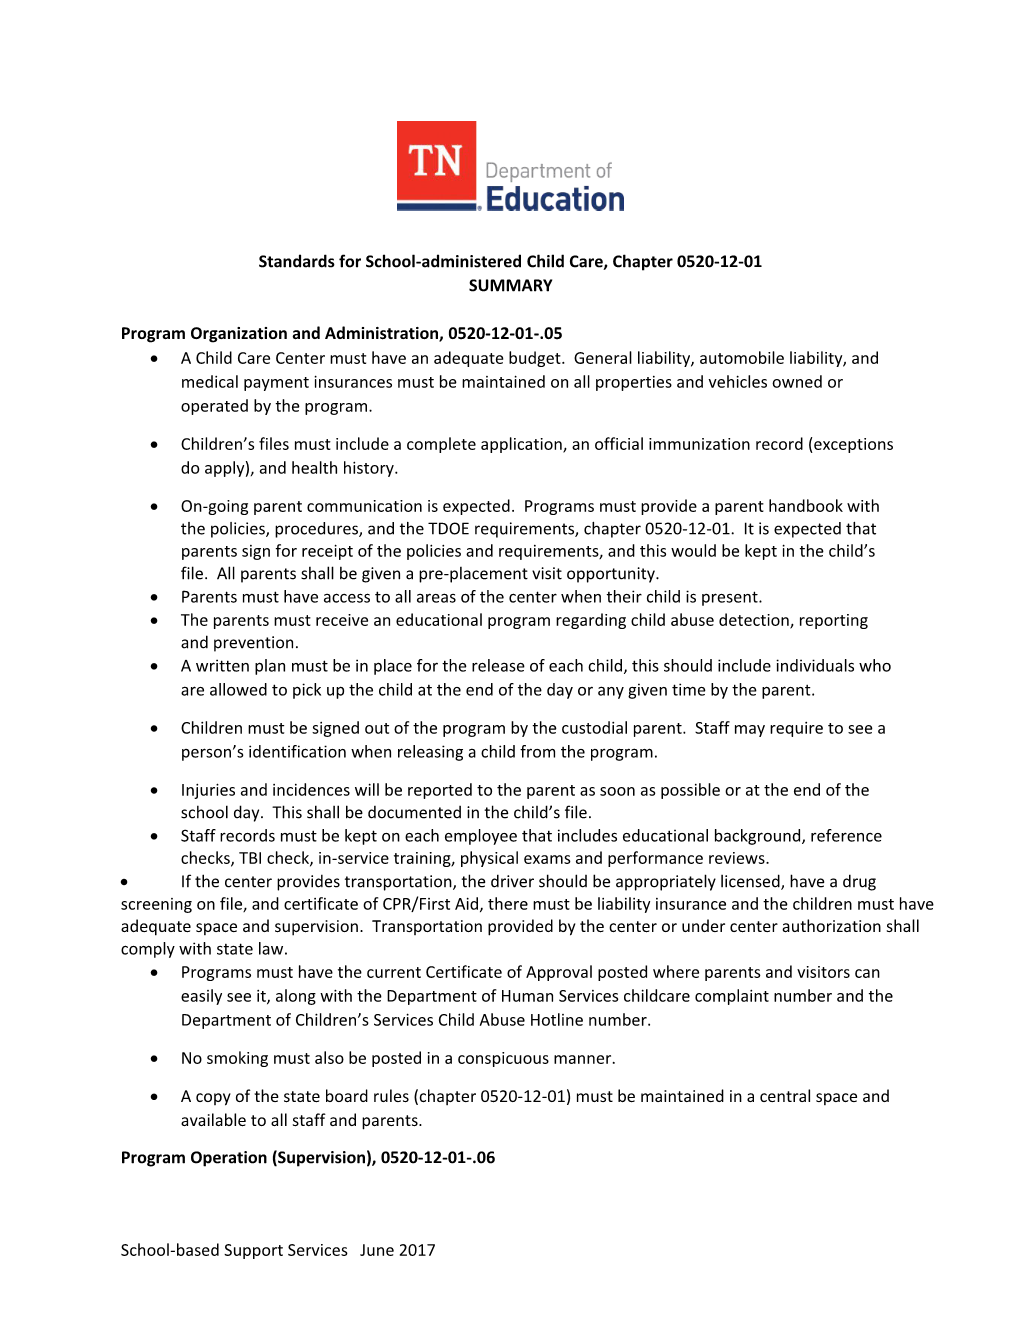 Standards for School-Administered Child Care, Chapter 0520-12-01